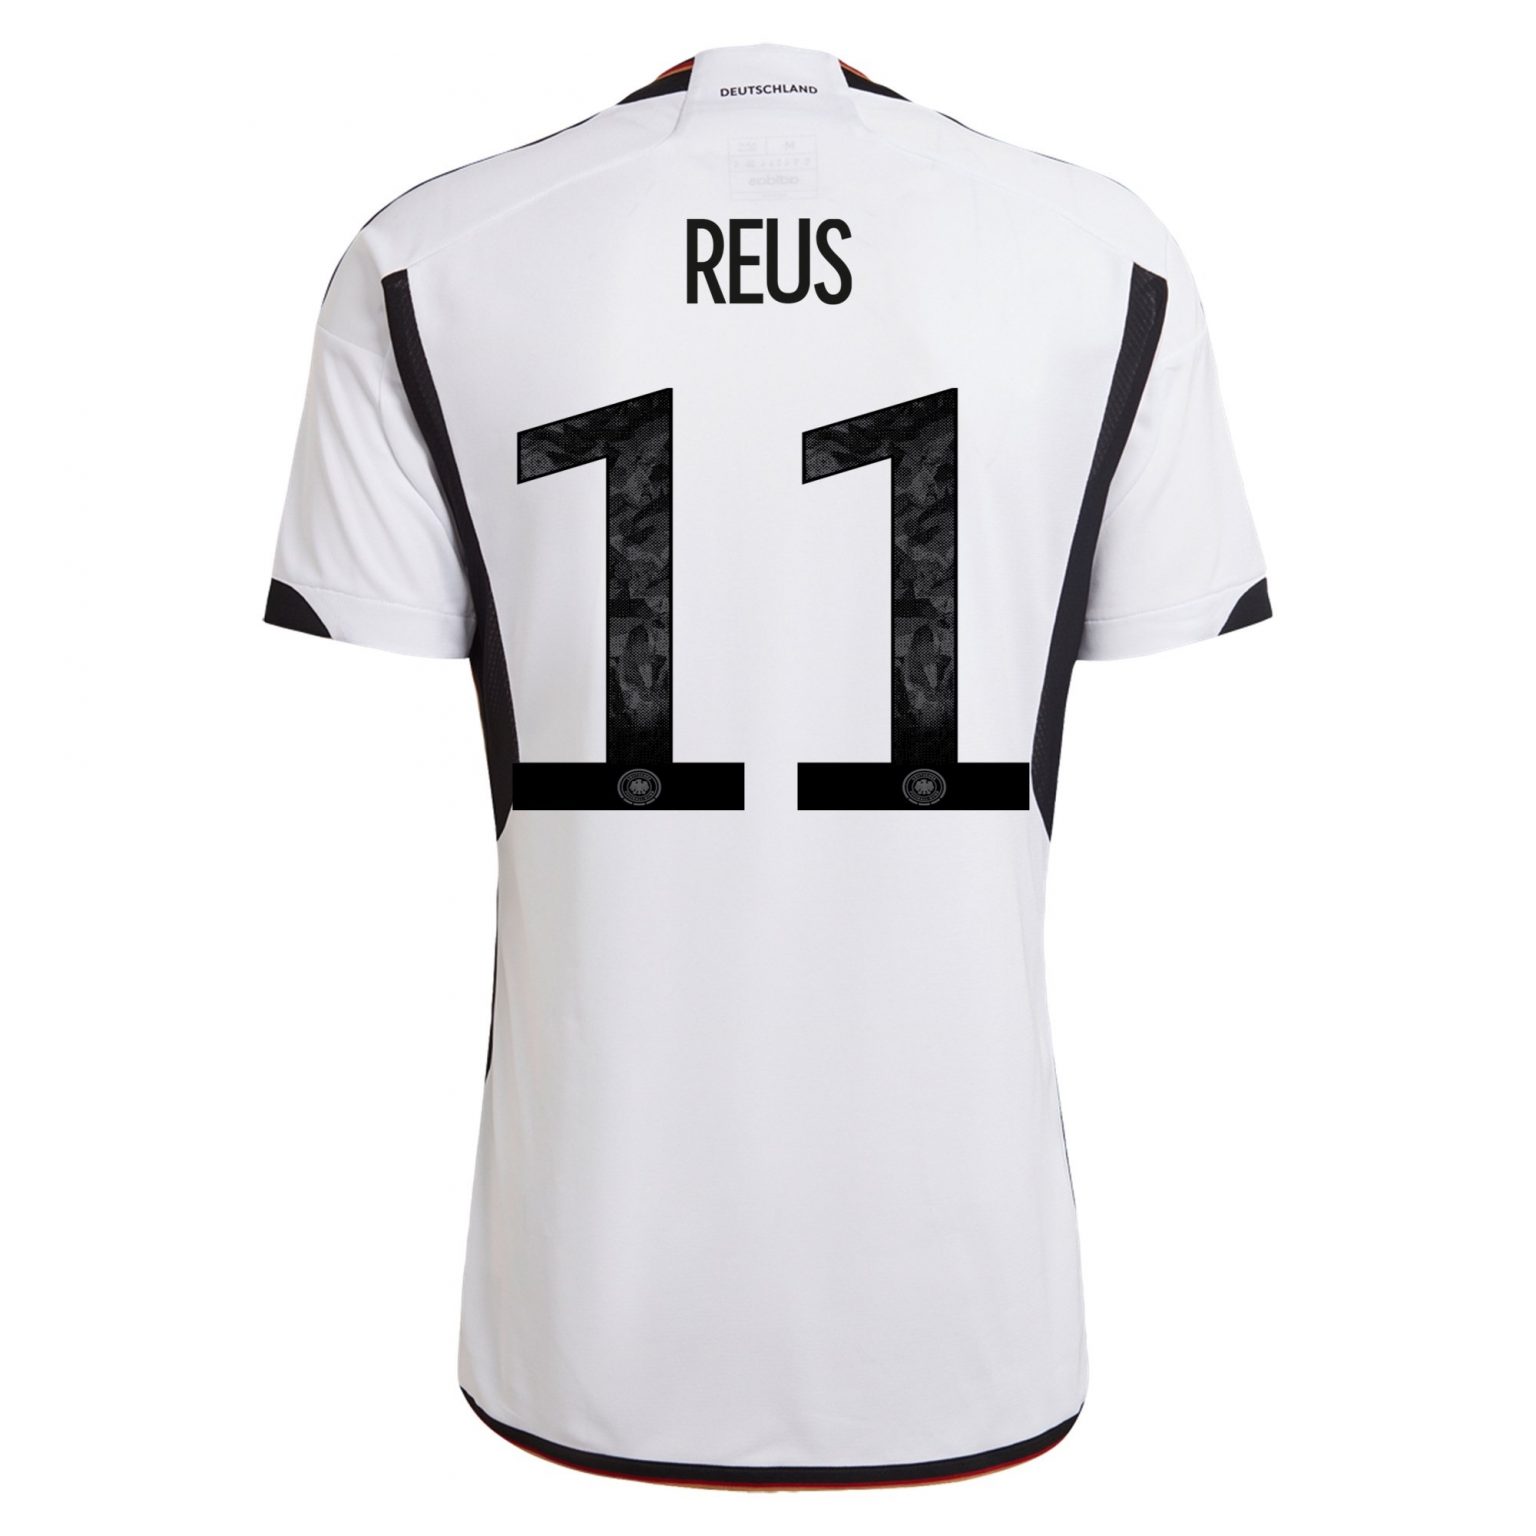 Marco Reus Germany 22/23 Home Jersey by adidas - Arena Jerseys